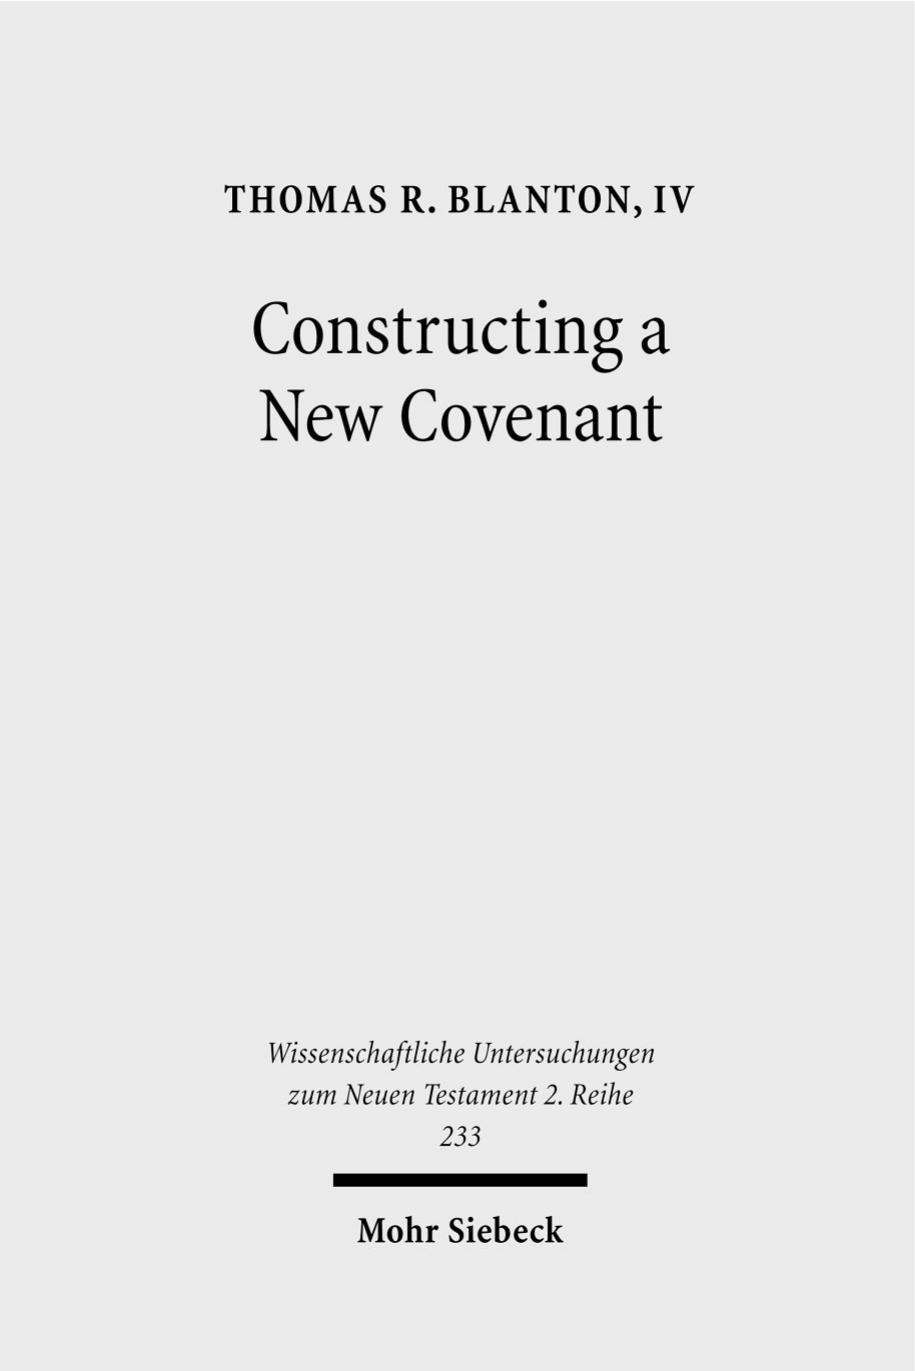 Constructing a New Covenant by Blanton IV